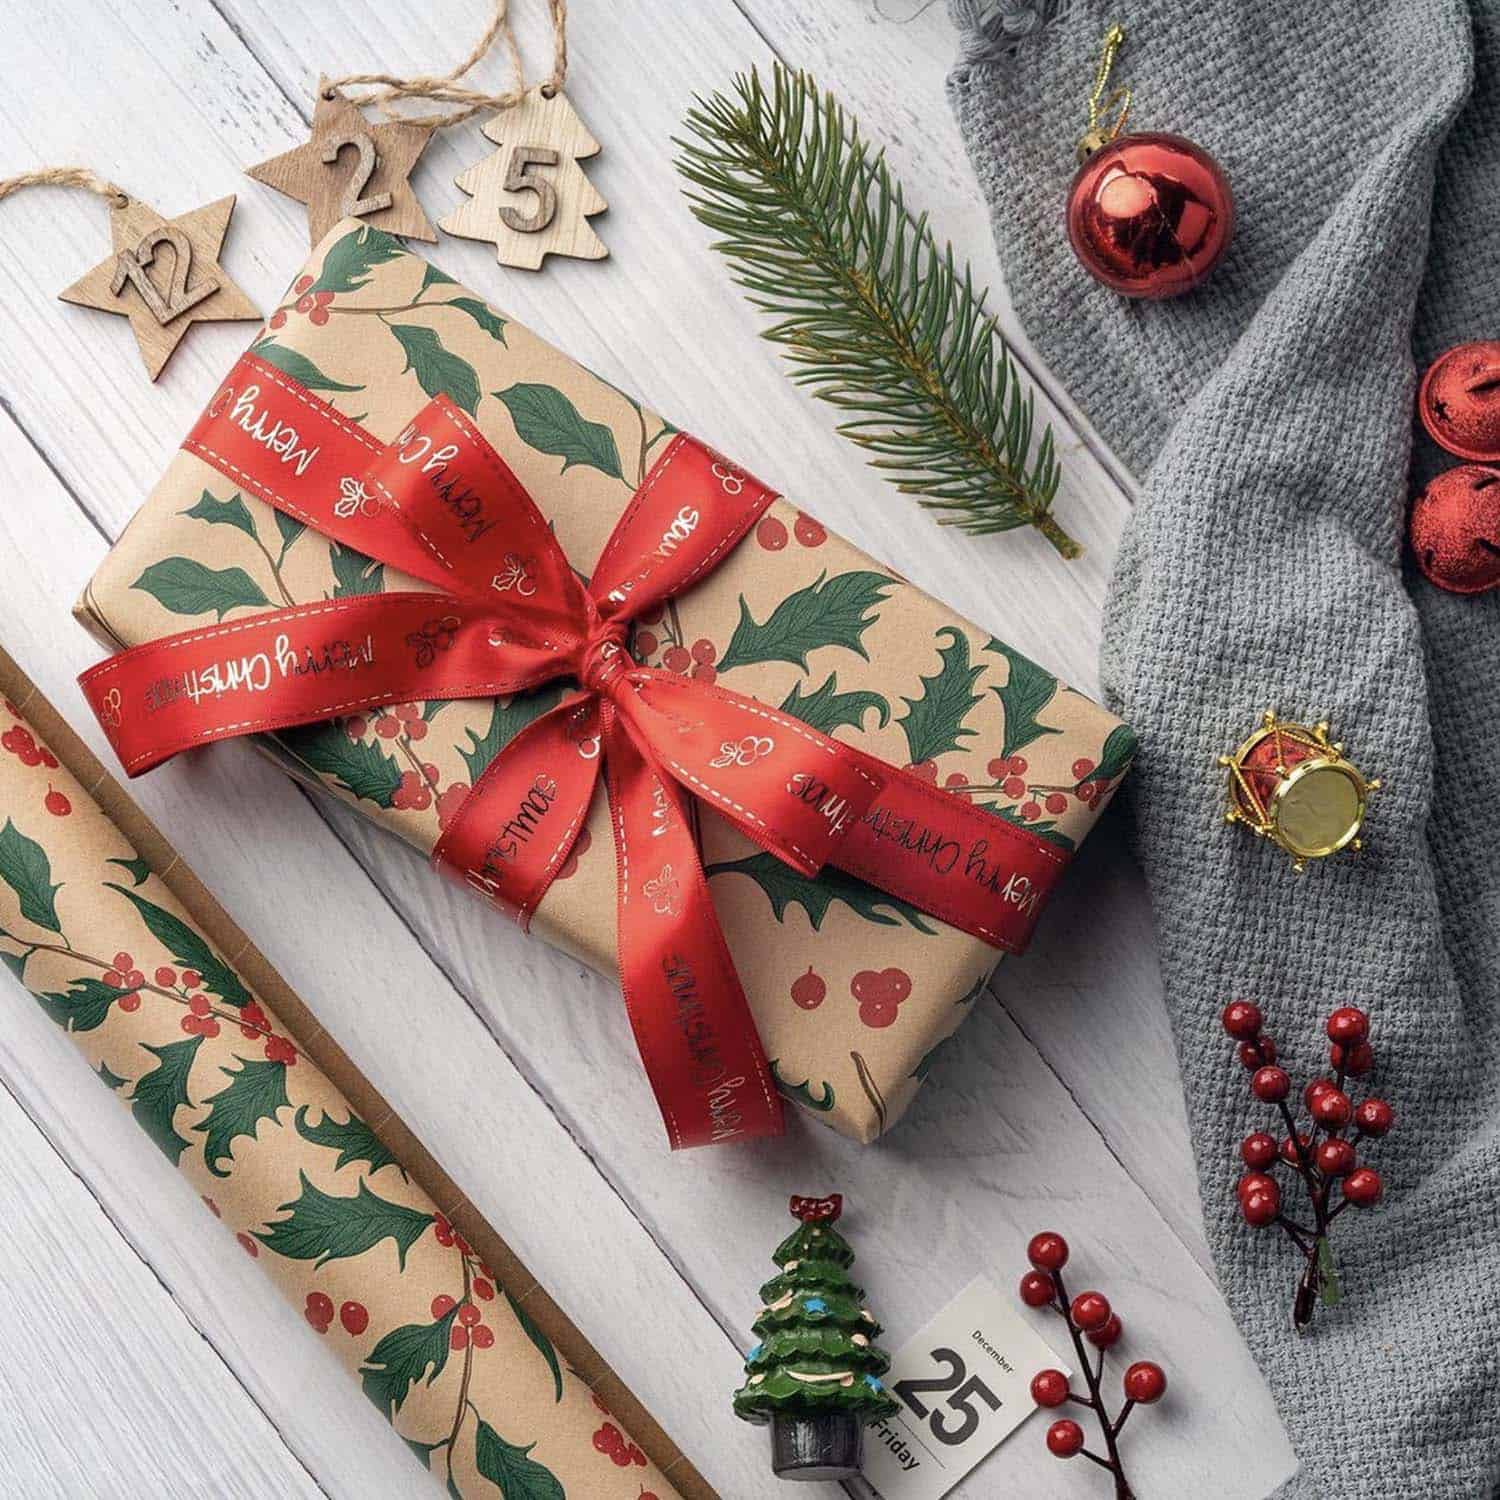 Kraft wrapping paper with holly and a red ribbon